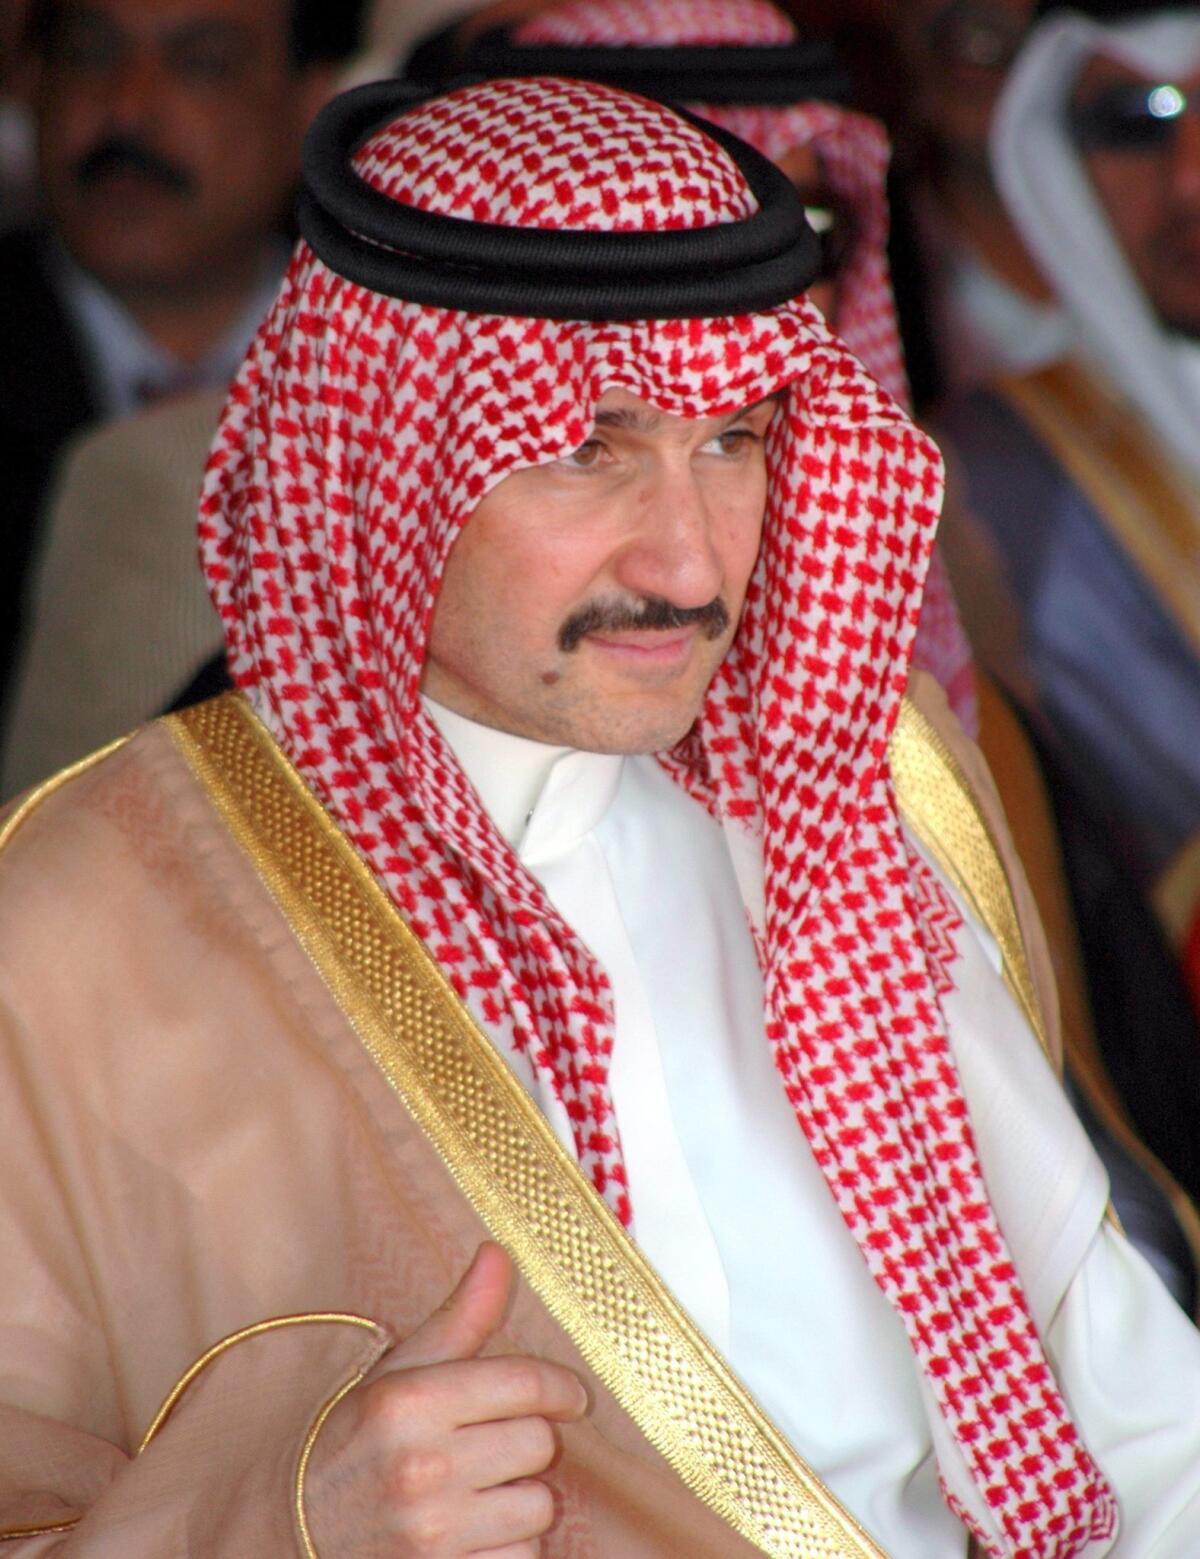 Saudi Prince Alwaleed bin Talal is suing Forbes magazine, accusing it of underestimating his wealth on its annual list of the world's richest people.